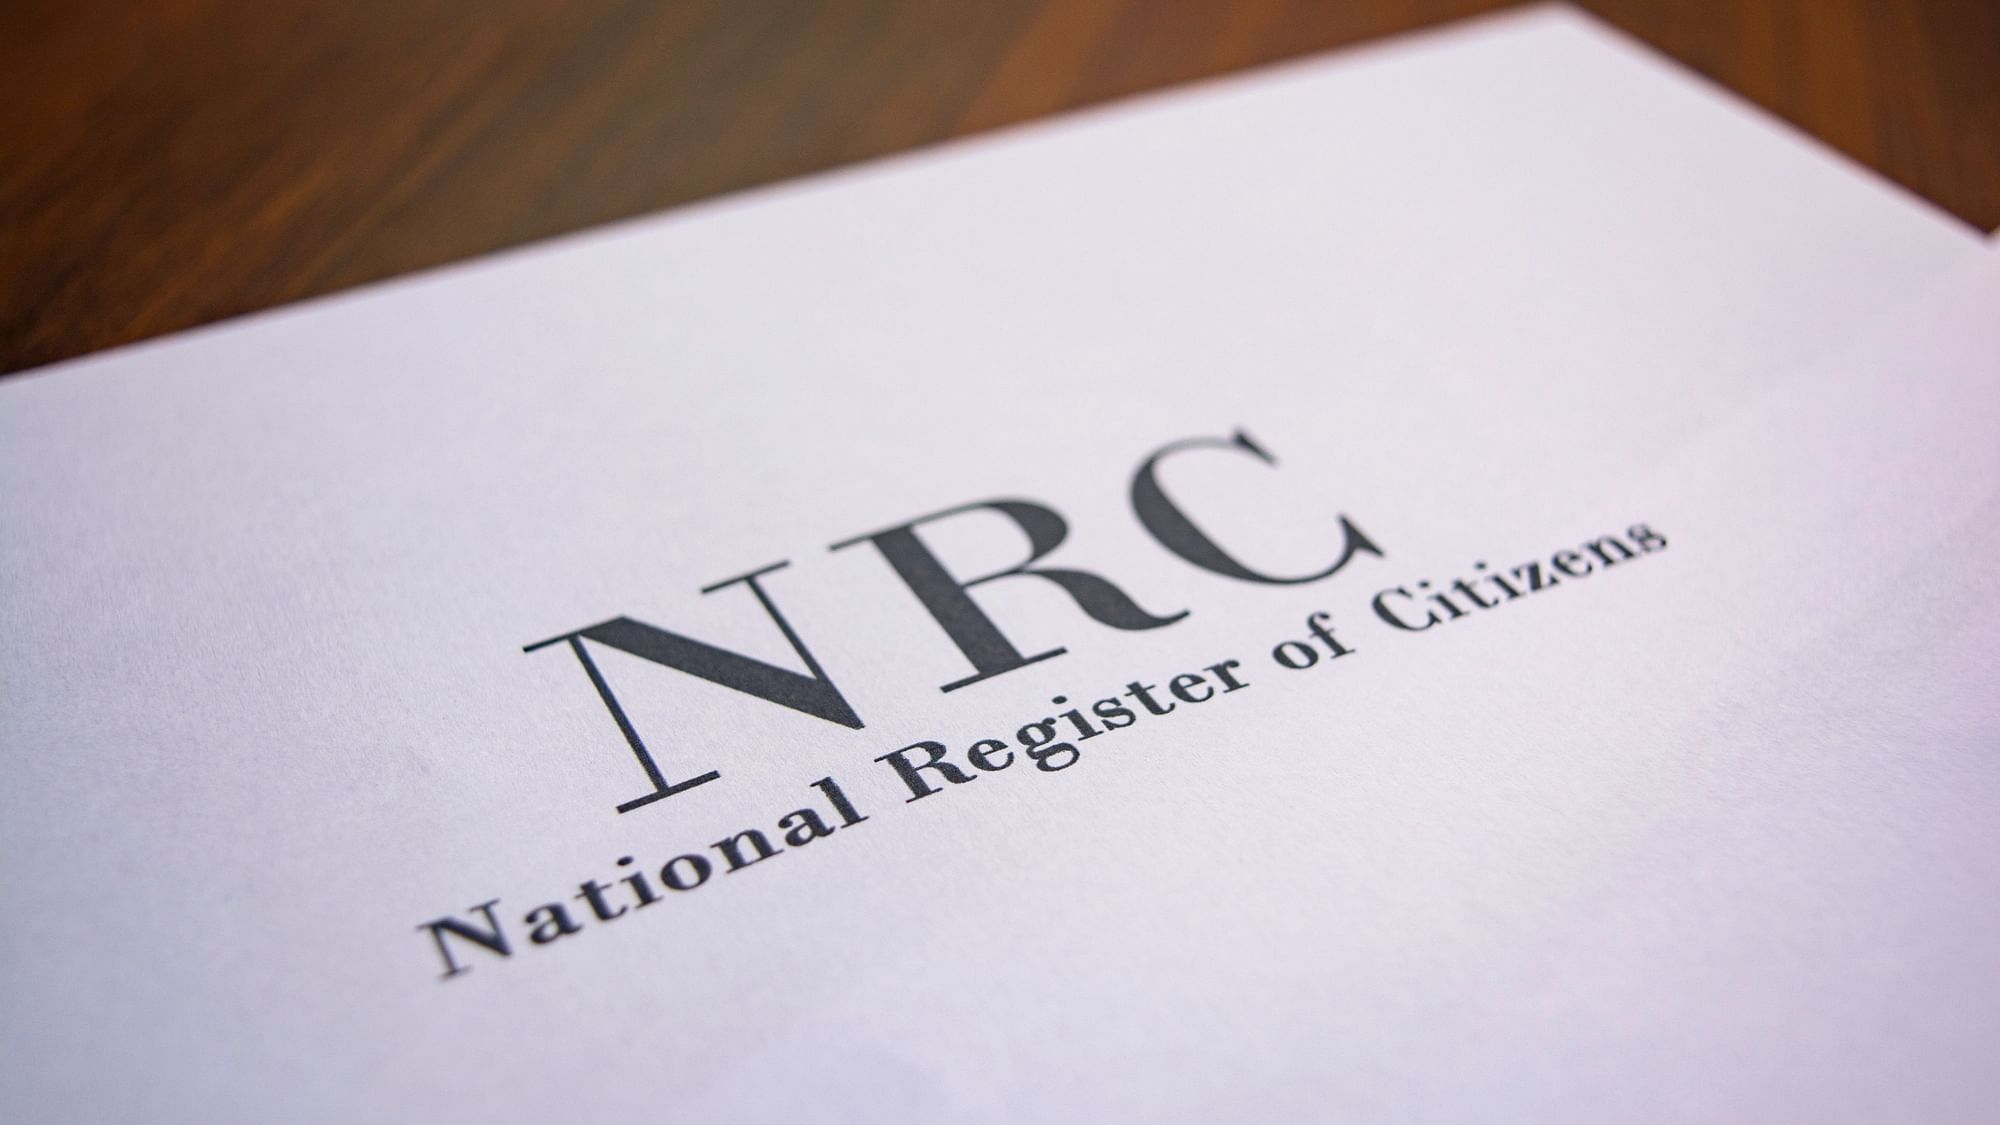 NRC Assam Draft List 2019: 1, 02,462 names have been excluded from the draft National Register of Citizens or NRC released by the Government of Assam on 26 June.